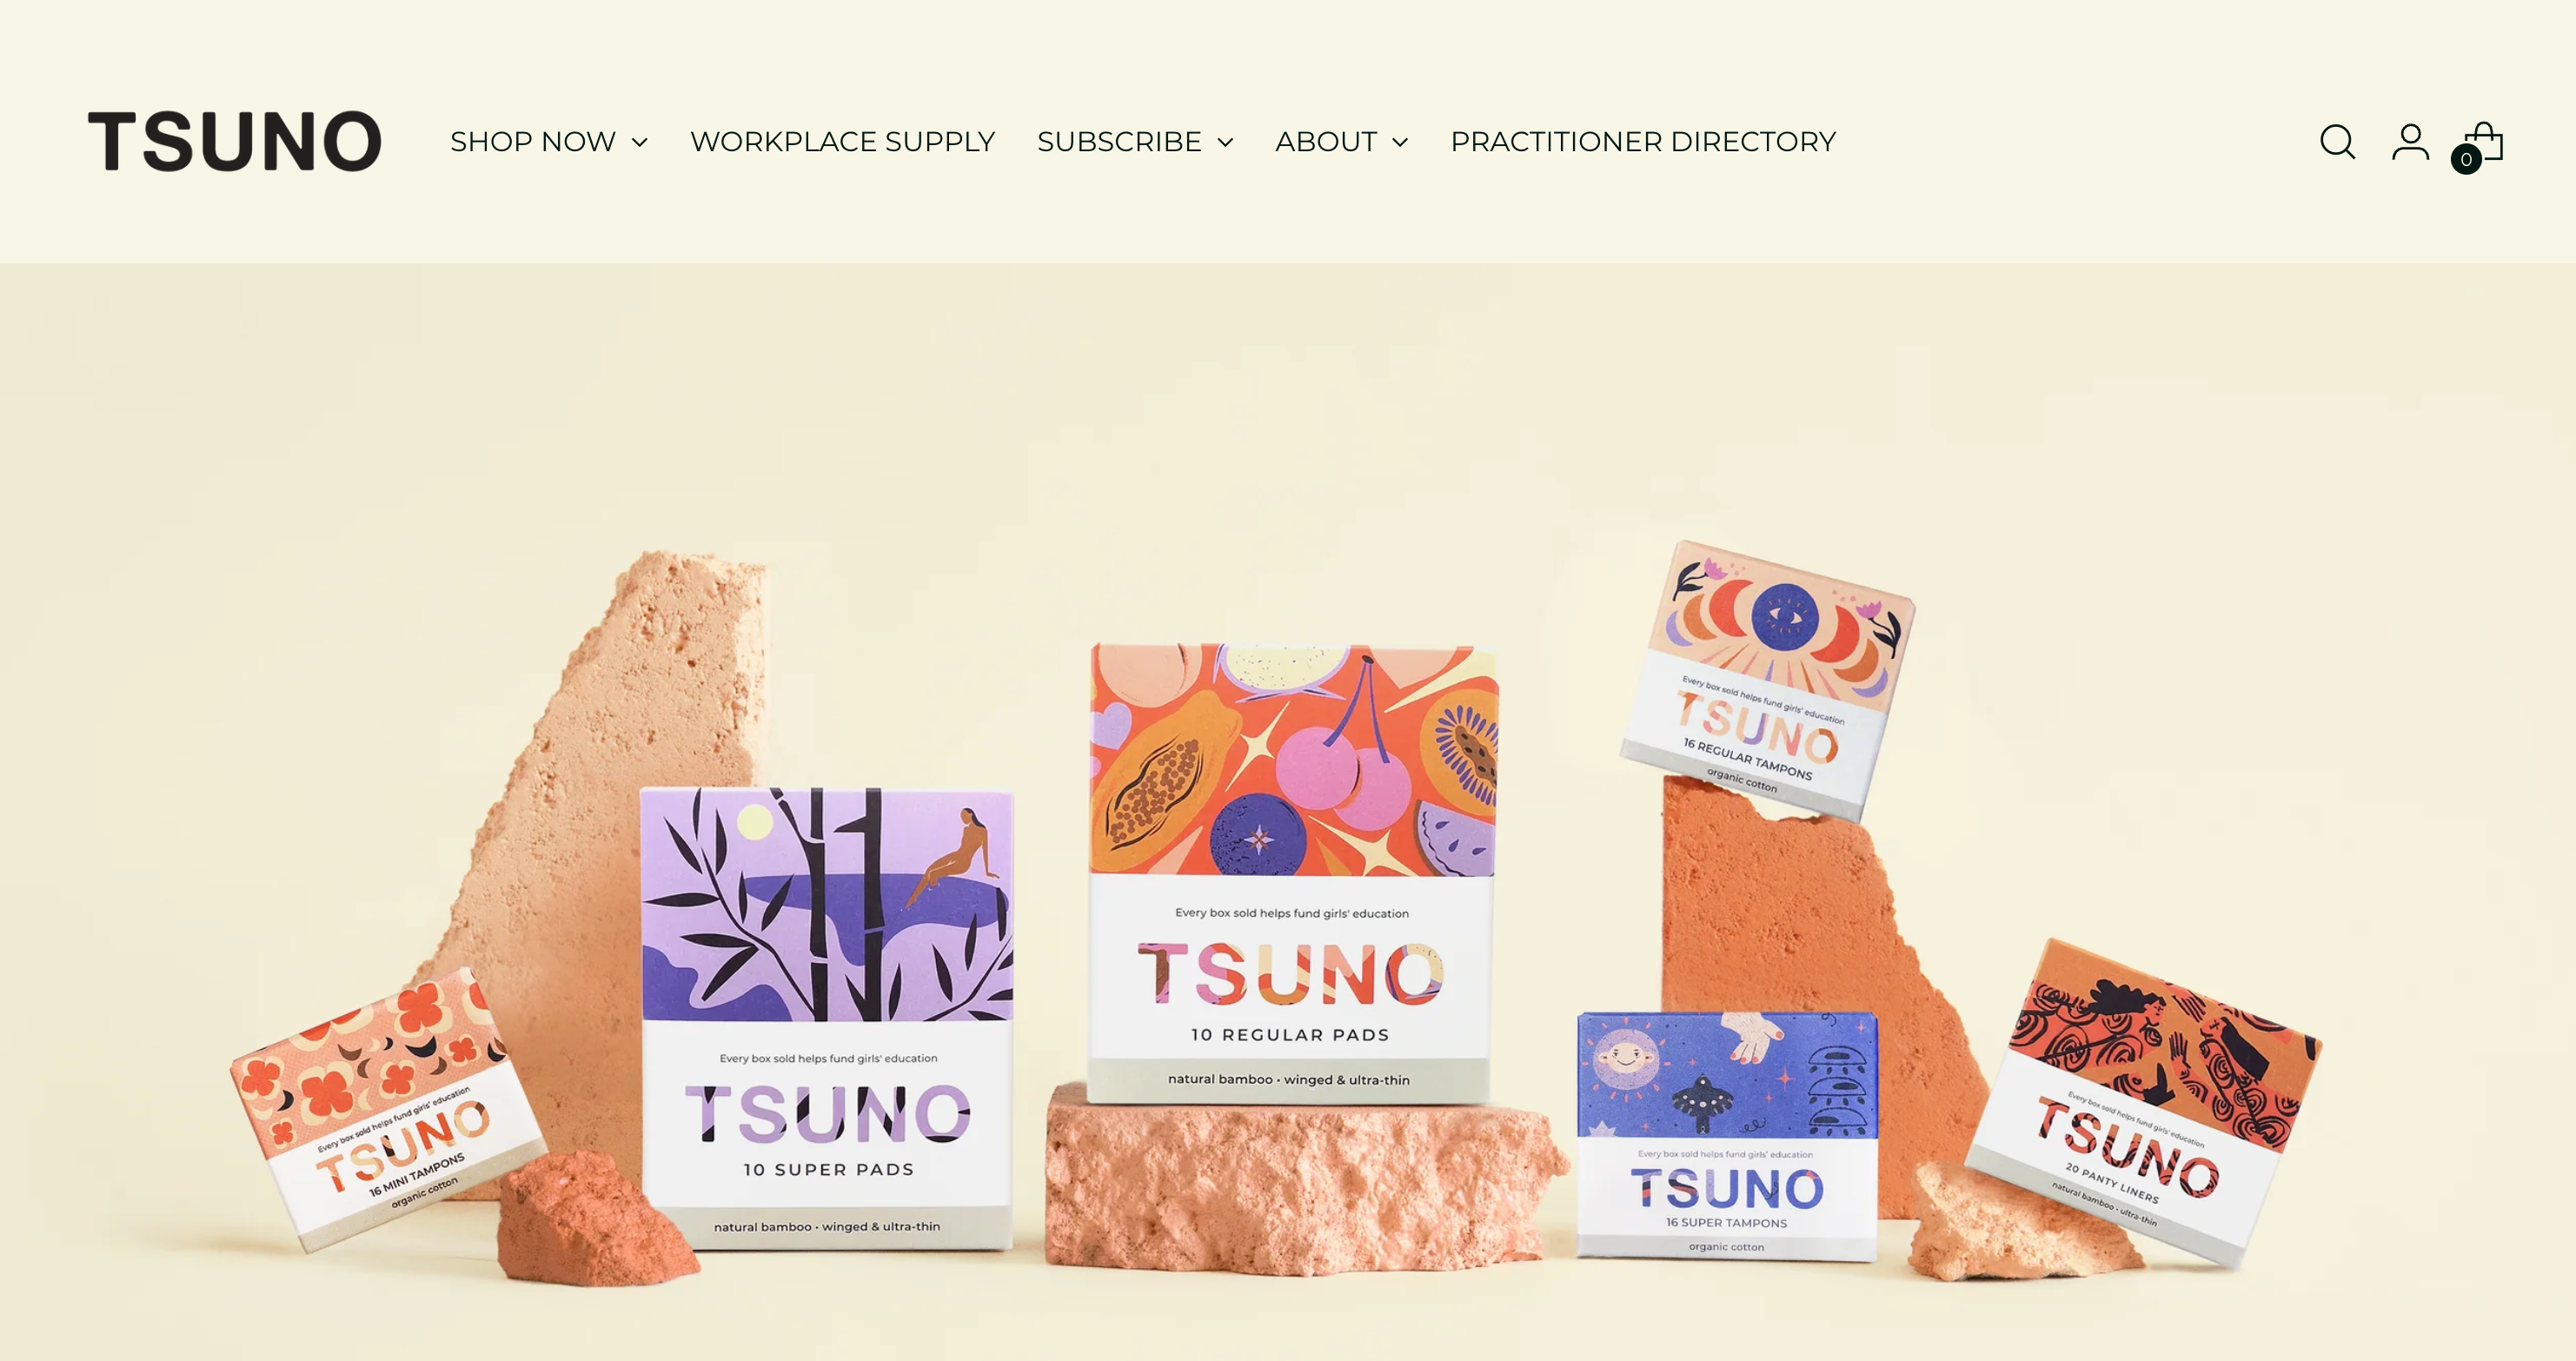 Ecommerce homepage for the brand Tsuno